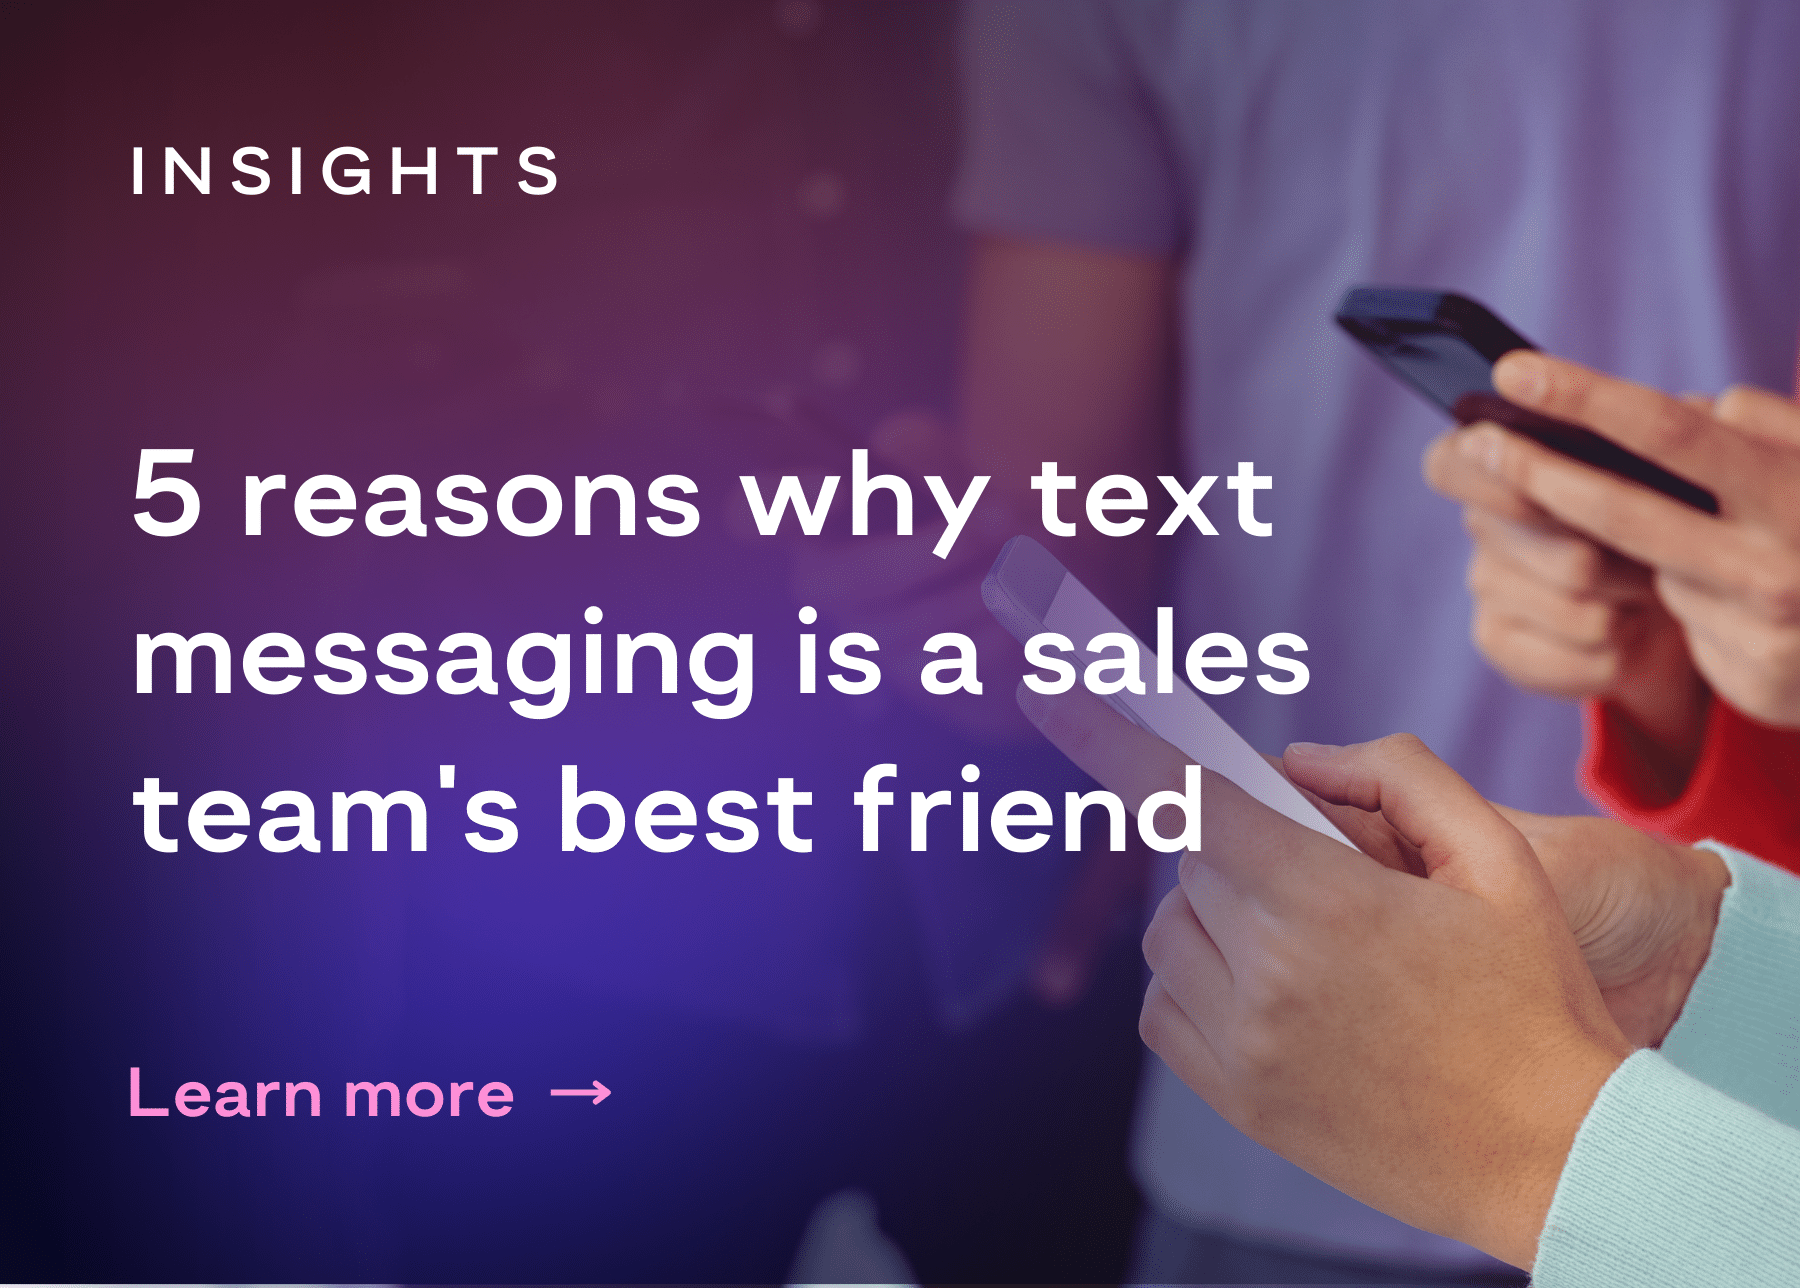 Multiple people hold cell phones in their hands next to the title "5 reasons why text messaging is a sales team's best friend"